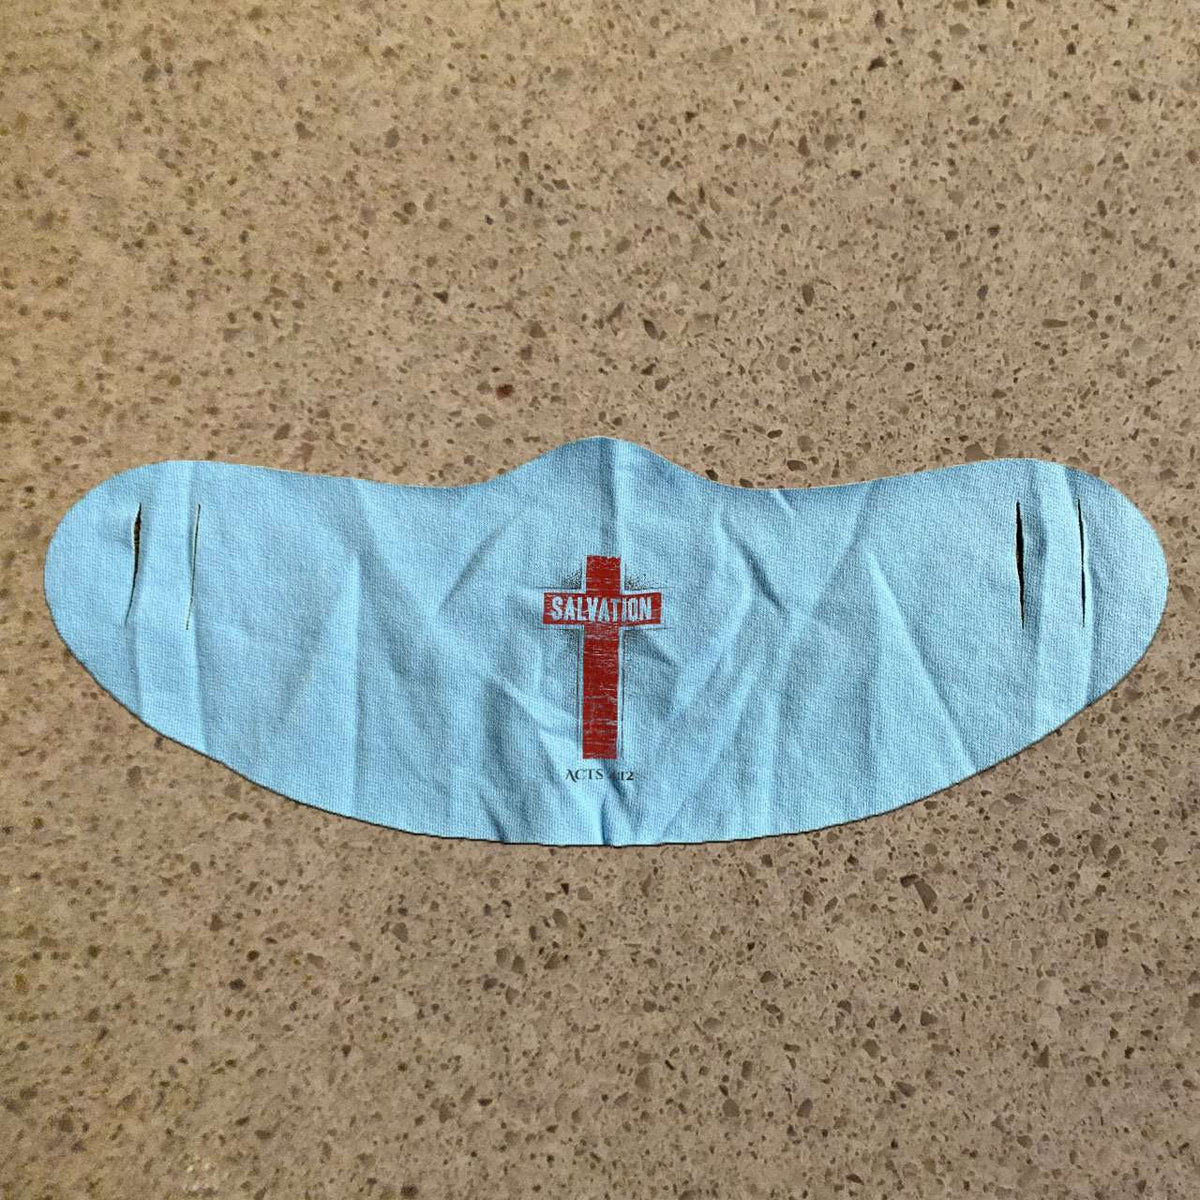 Designs by MyUtopia Shout Out:Salvation Acts 4:12 Fabric Face Covering / Face Mask,Light Blue,Fabric Face Mask